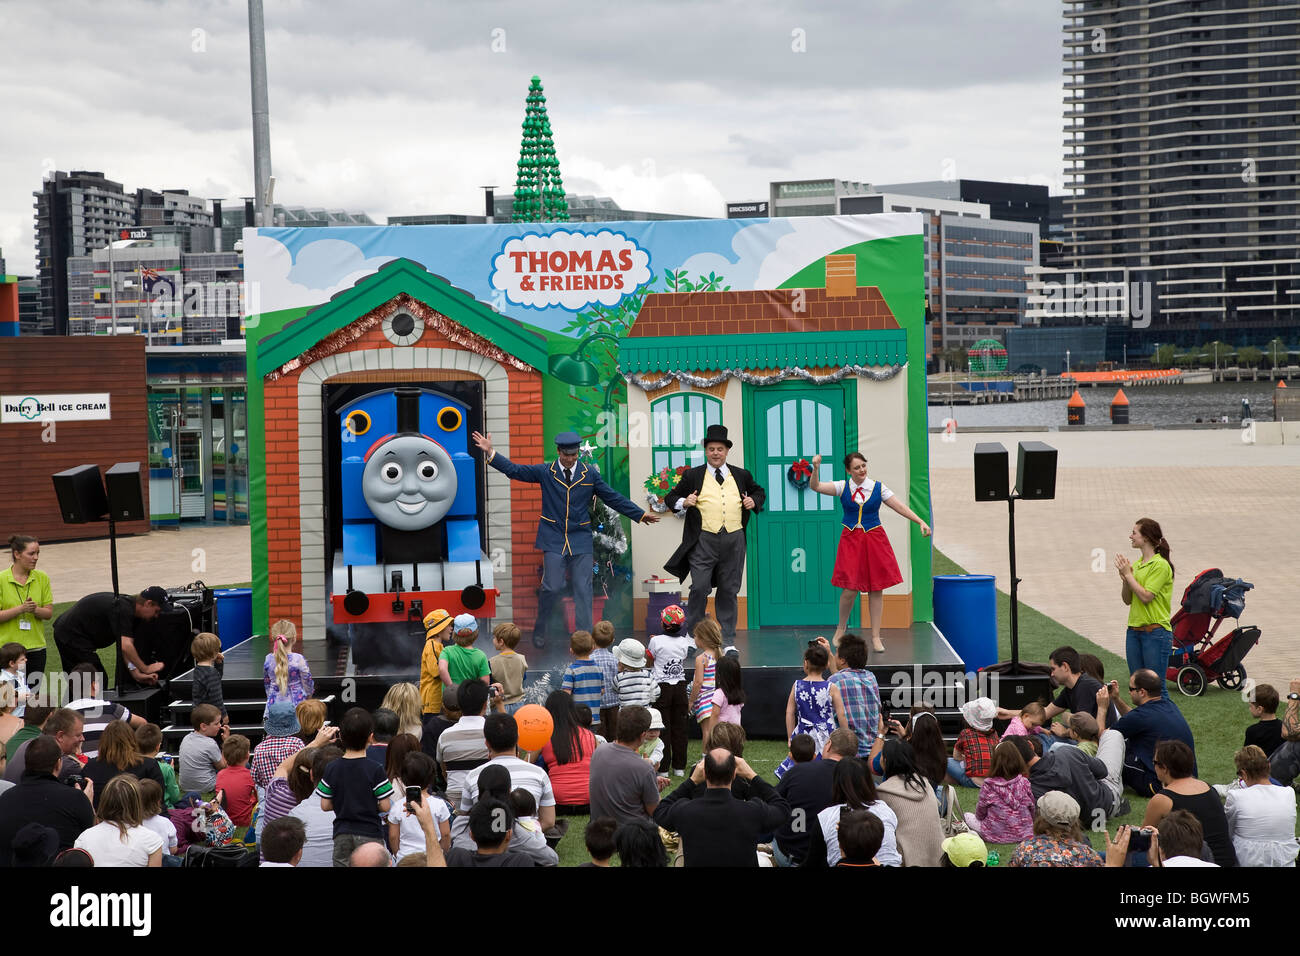 Children watching Thomas the Tank Engine at Melbourne Docklands, Australia Stock Photo